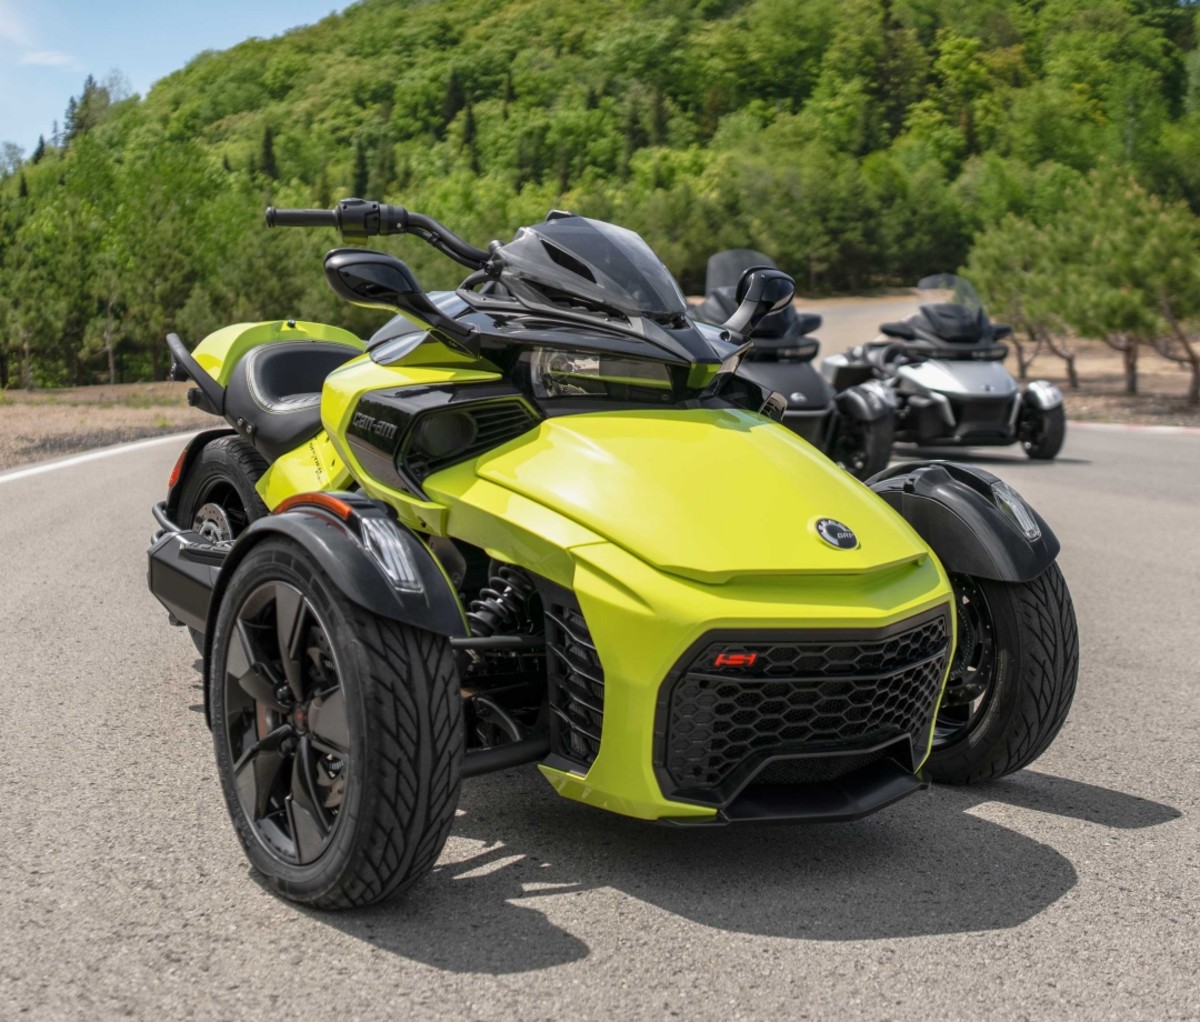 The 2022 Can-Am Spyder F3-S